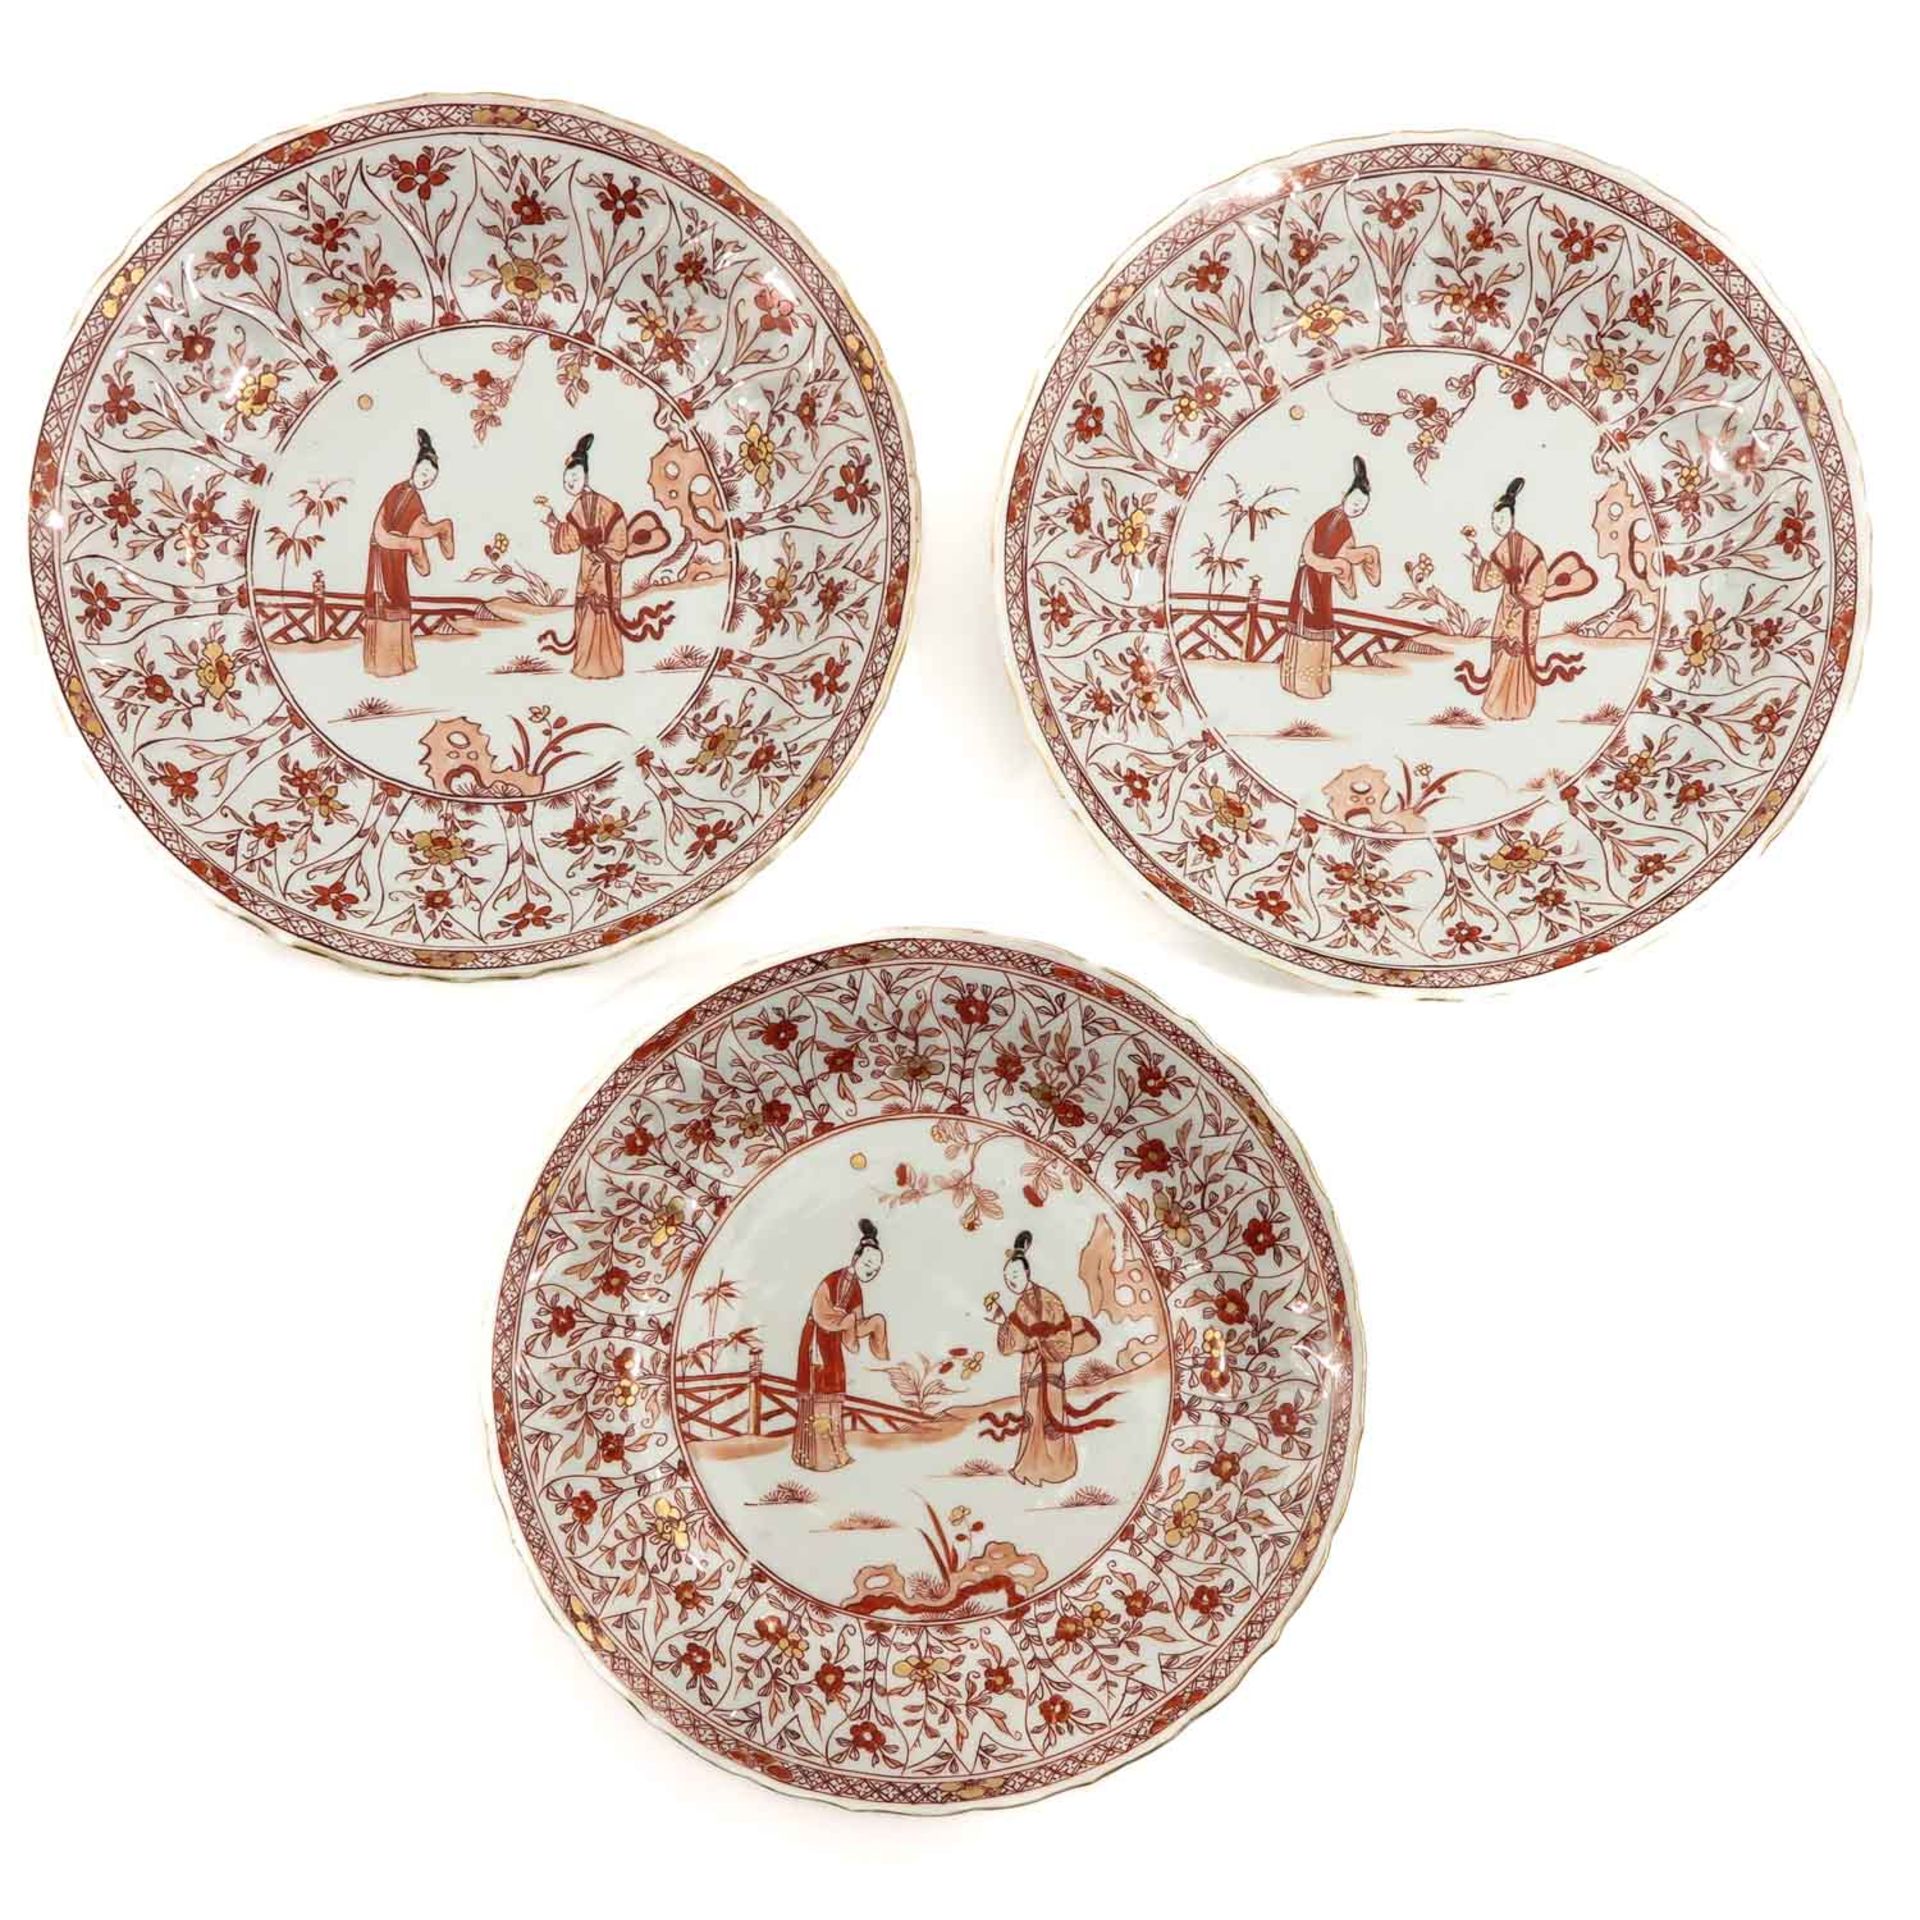 A Series of 3 Iron Red and Gilt Decorates Plates